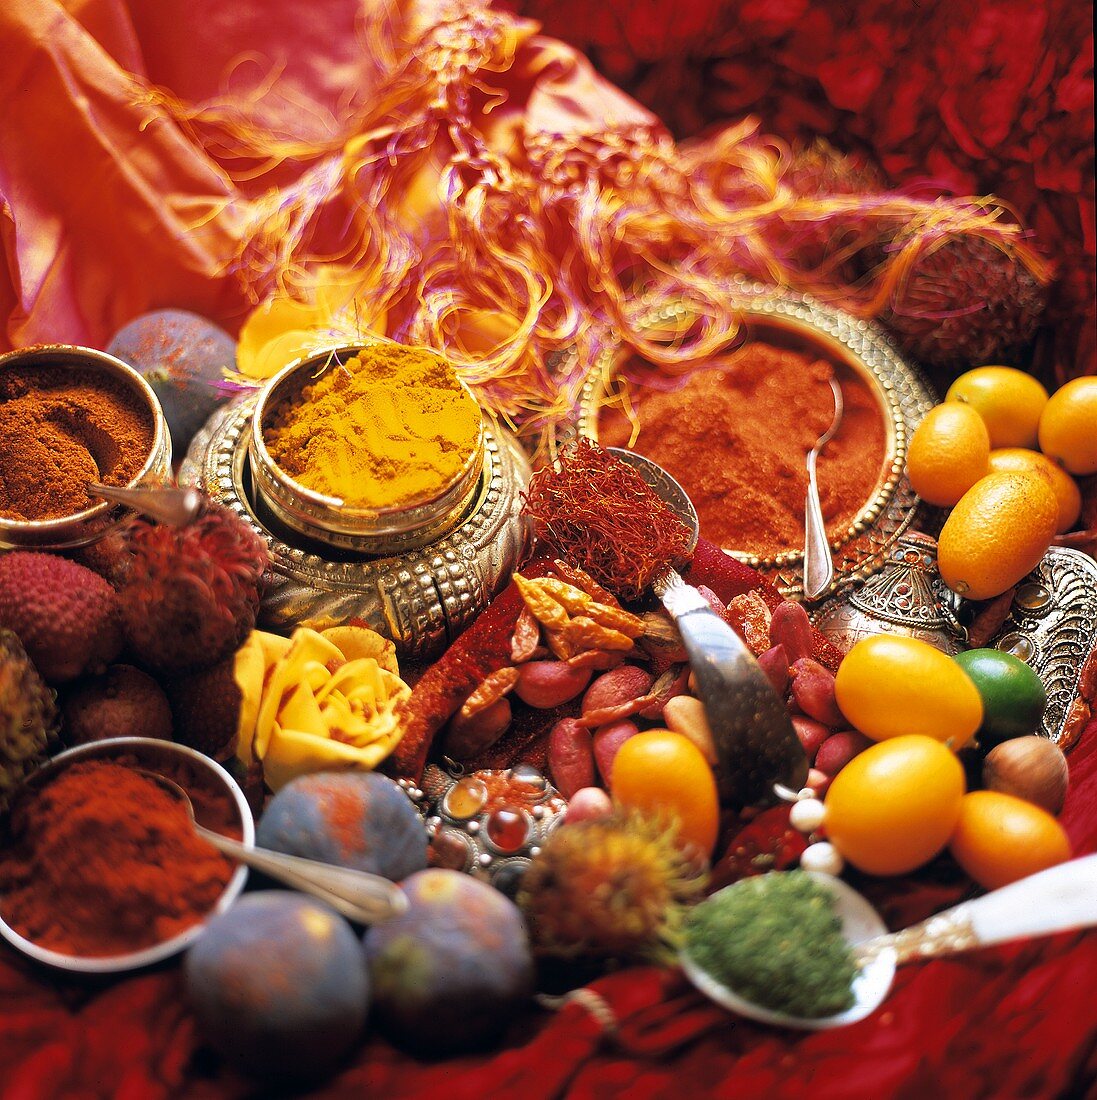 Colorful Spice Still Life with Exotic Fruit